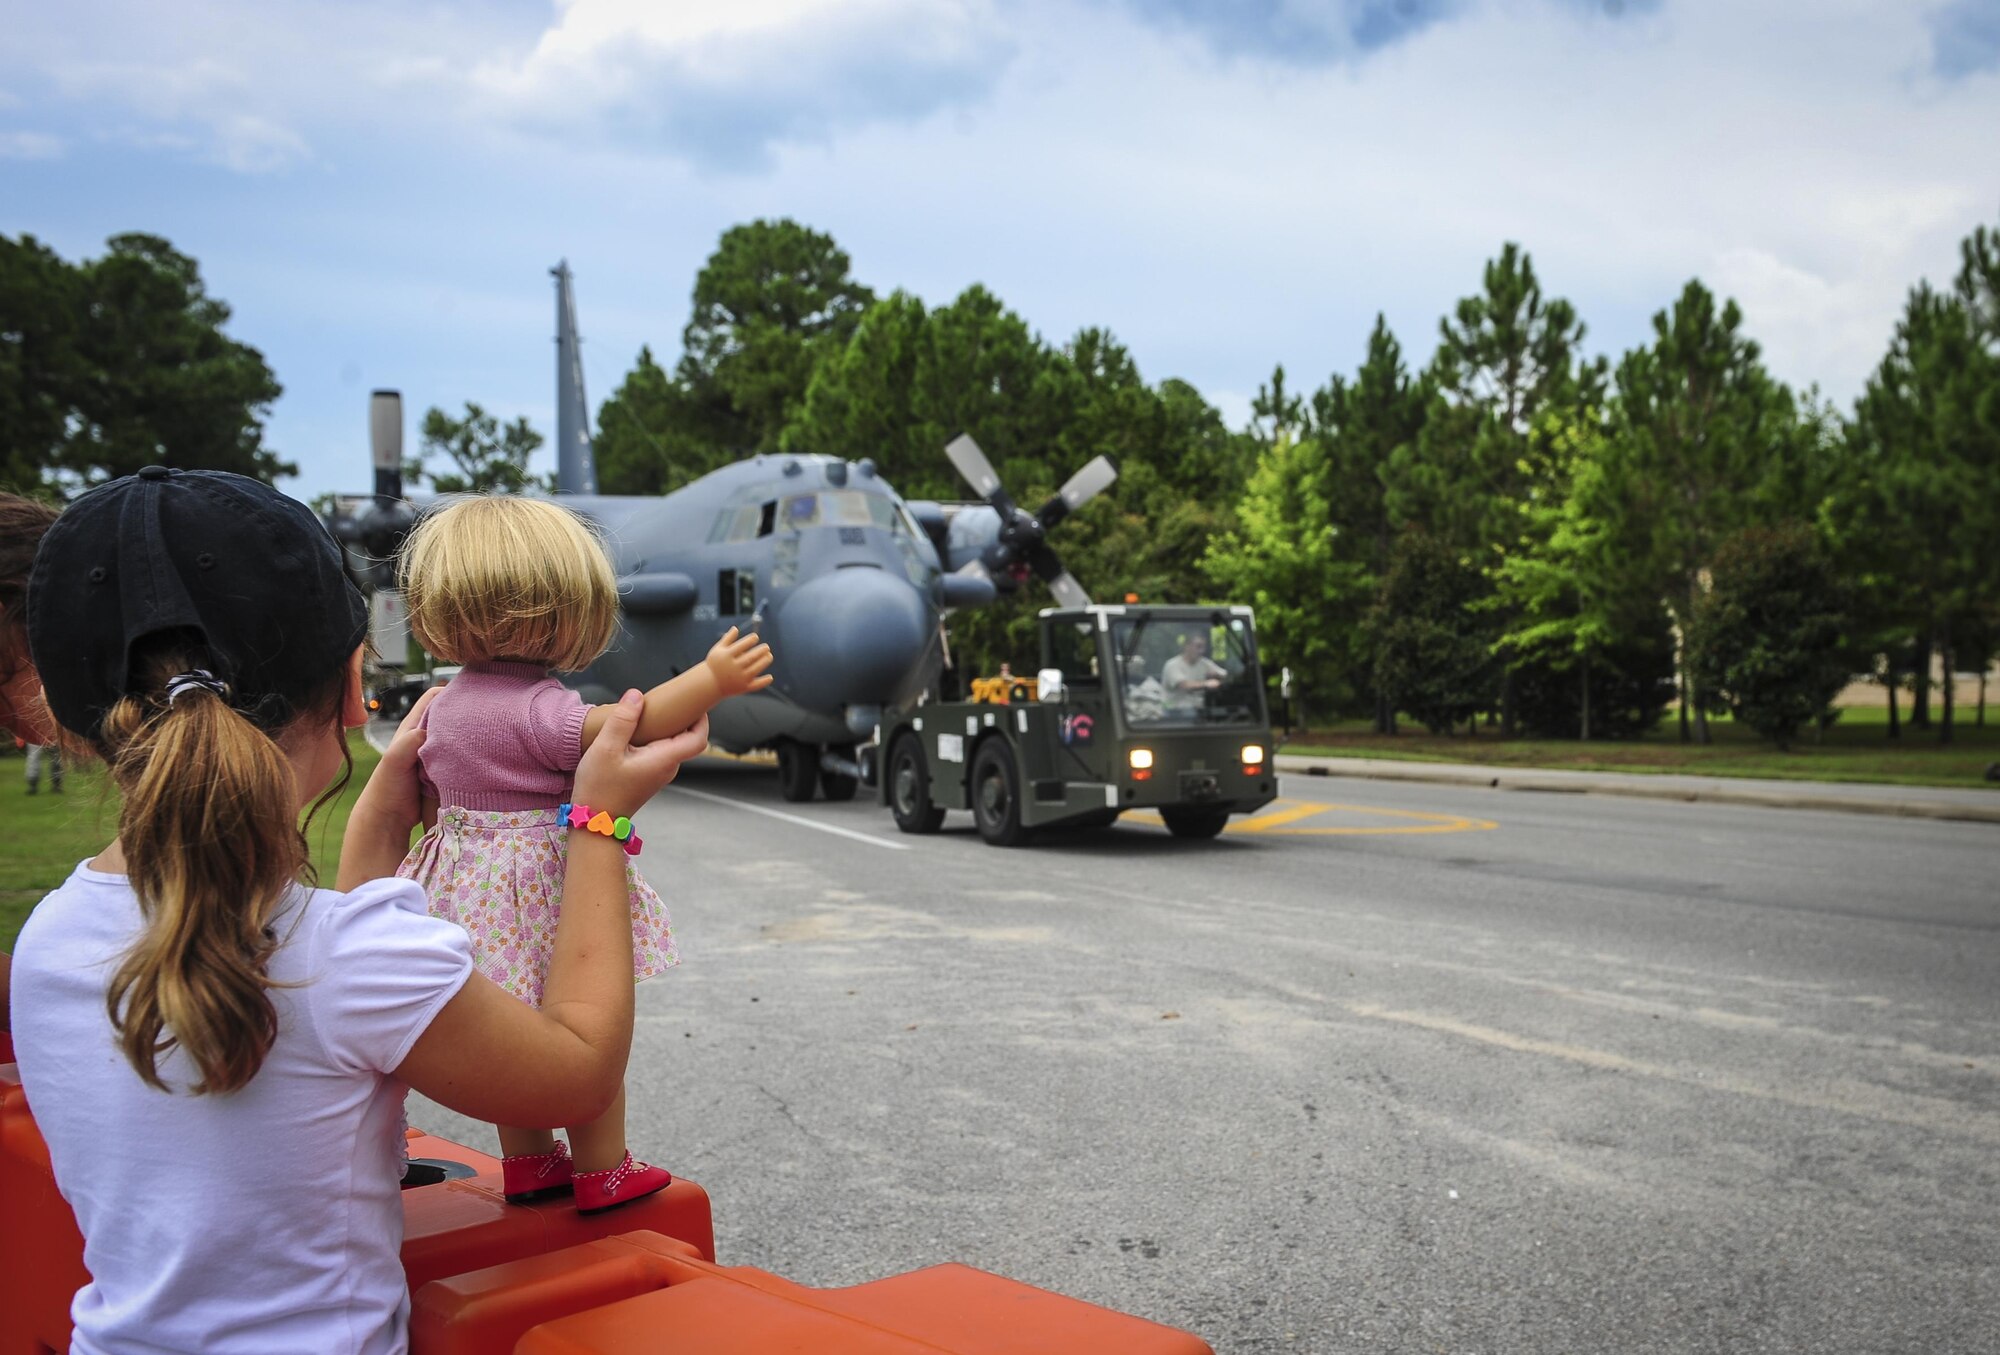 A child waves her doll’s hand as Airmen with the 1st Special Operations Aircraft Maintenance Squadron tows an AC-130H Spectre down Independence Road on Hurlburt Field, Fla., Aug. 15, 2015. The Spectre was towed from the flightline and staged for installation in to the Hurlburt Field Air Park. The AC-130H fleet retired May 26, 2015, after more than 45 years of service. The installation process for this aircraft, known as “Wicked Wanda,” is set to be complete by Aug. 28, 2015. (U.S. Air Force photo by Senior Airman Meagan Schutter/Released)